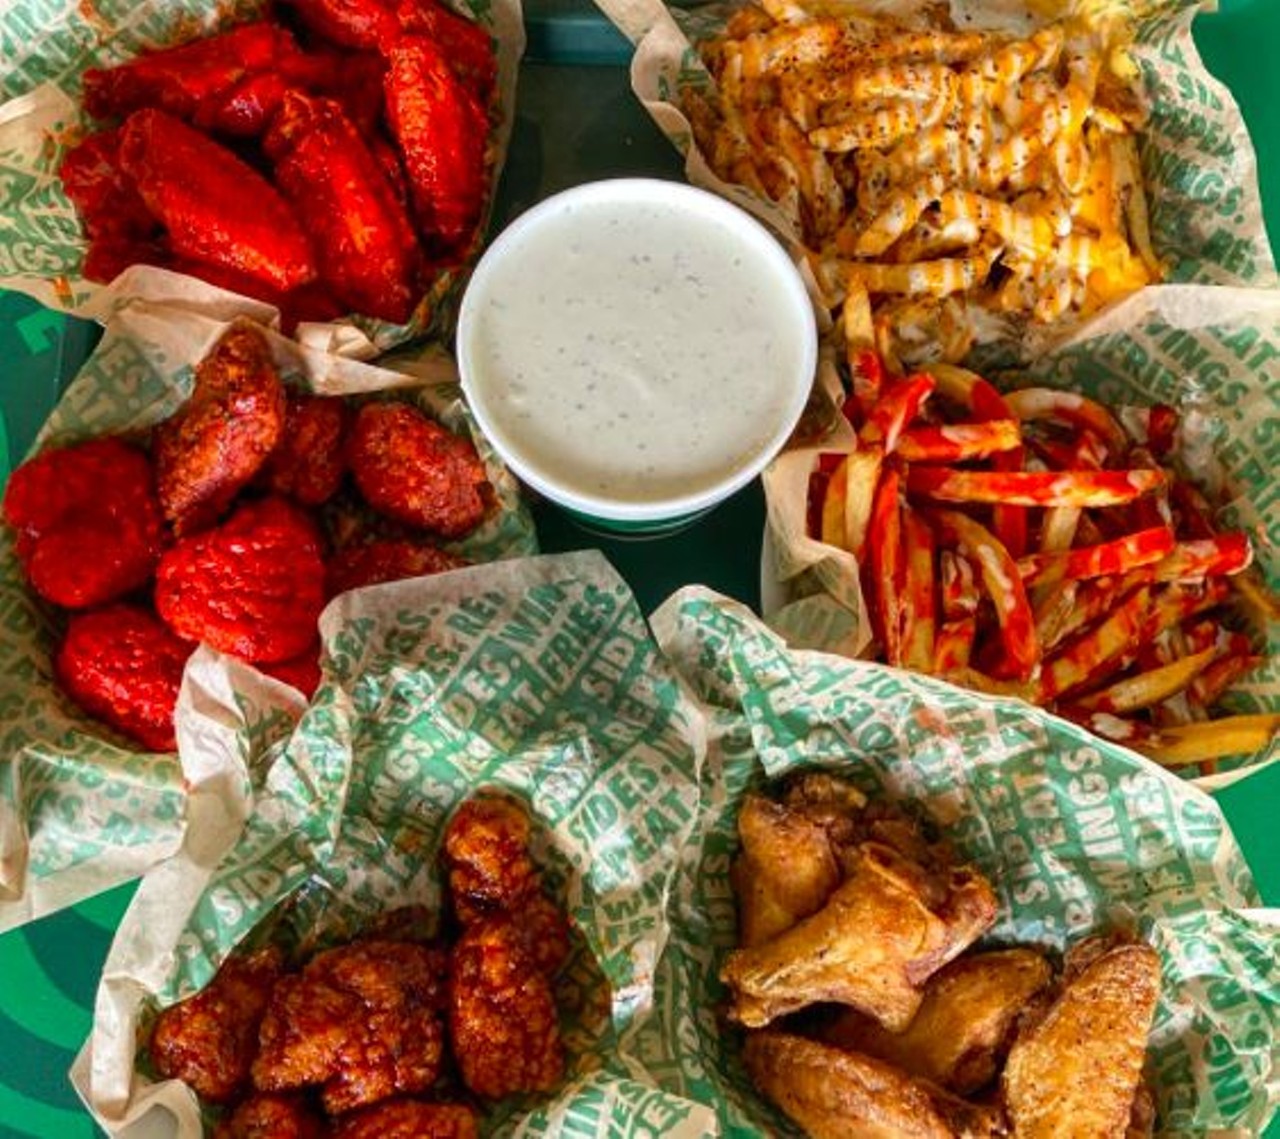 Wingstop
1331 M-102; 313-305-4797; wingstop.com
With its Wing Calculator, Wingstop gives you the option to choose your wing flavor from sweetest to spiciest. The restaurant offers unique sides such as Voodoo fries and seasoned corn as well.
Photo via Wingstop / Facebook